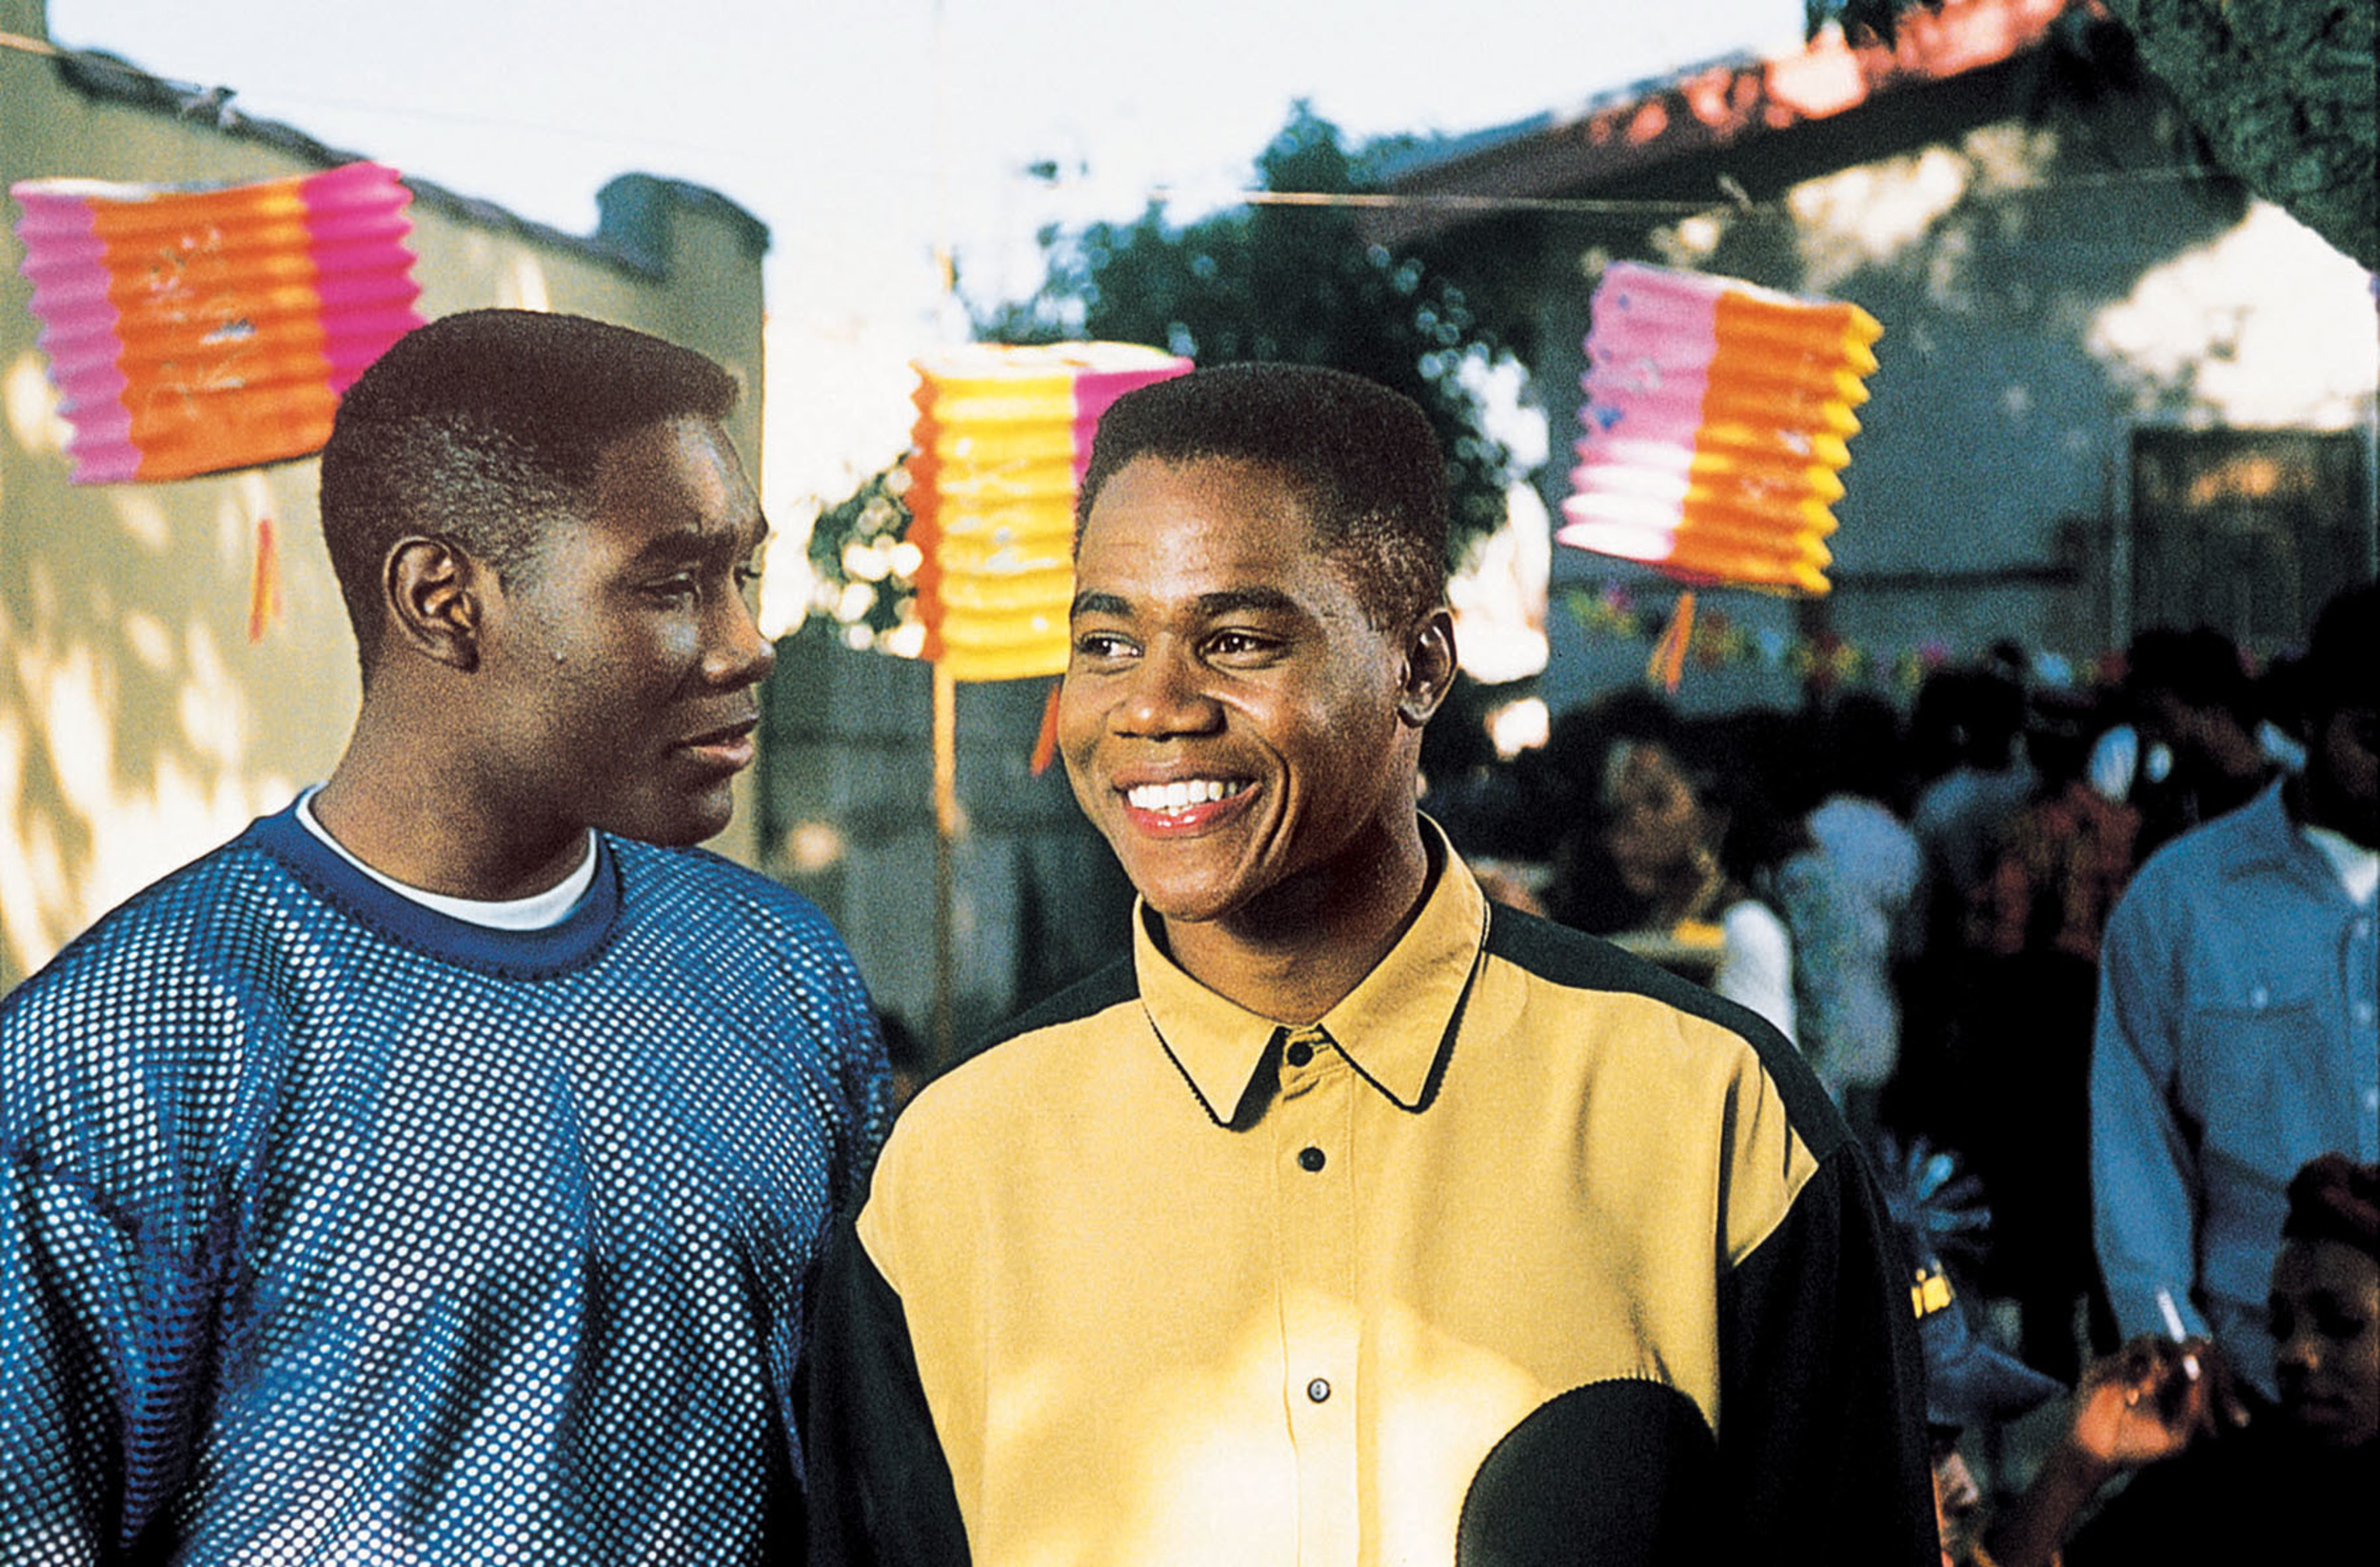 <p>The late John Singleton's celebrated directorial debut is a gripping tale of life in South Central Los Angeles. Cuba Gooding Jr., Morris Chestnut, and Ice Cube all give notable performances as <a href="https://www.youtube.com/watch?v=vN_HrPvTVIk">high schoolers</a> looking to find some normalcy while trying to survive the violent streets of their gang-infested neighborhood. </p><p><a href='https://www.msn.com/en-us/community/channel/vid-cj9pqbr0vn9in2b6ddcd8sfgpfq6x6utp44fssrv6mc2gtybw0us'>Follow us on MSN to see more of our exclusive entertainment content.</a></p>